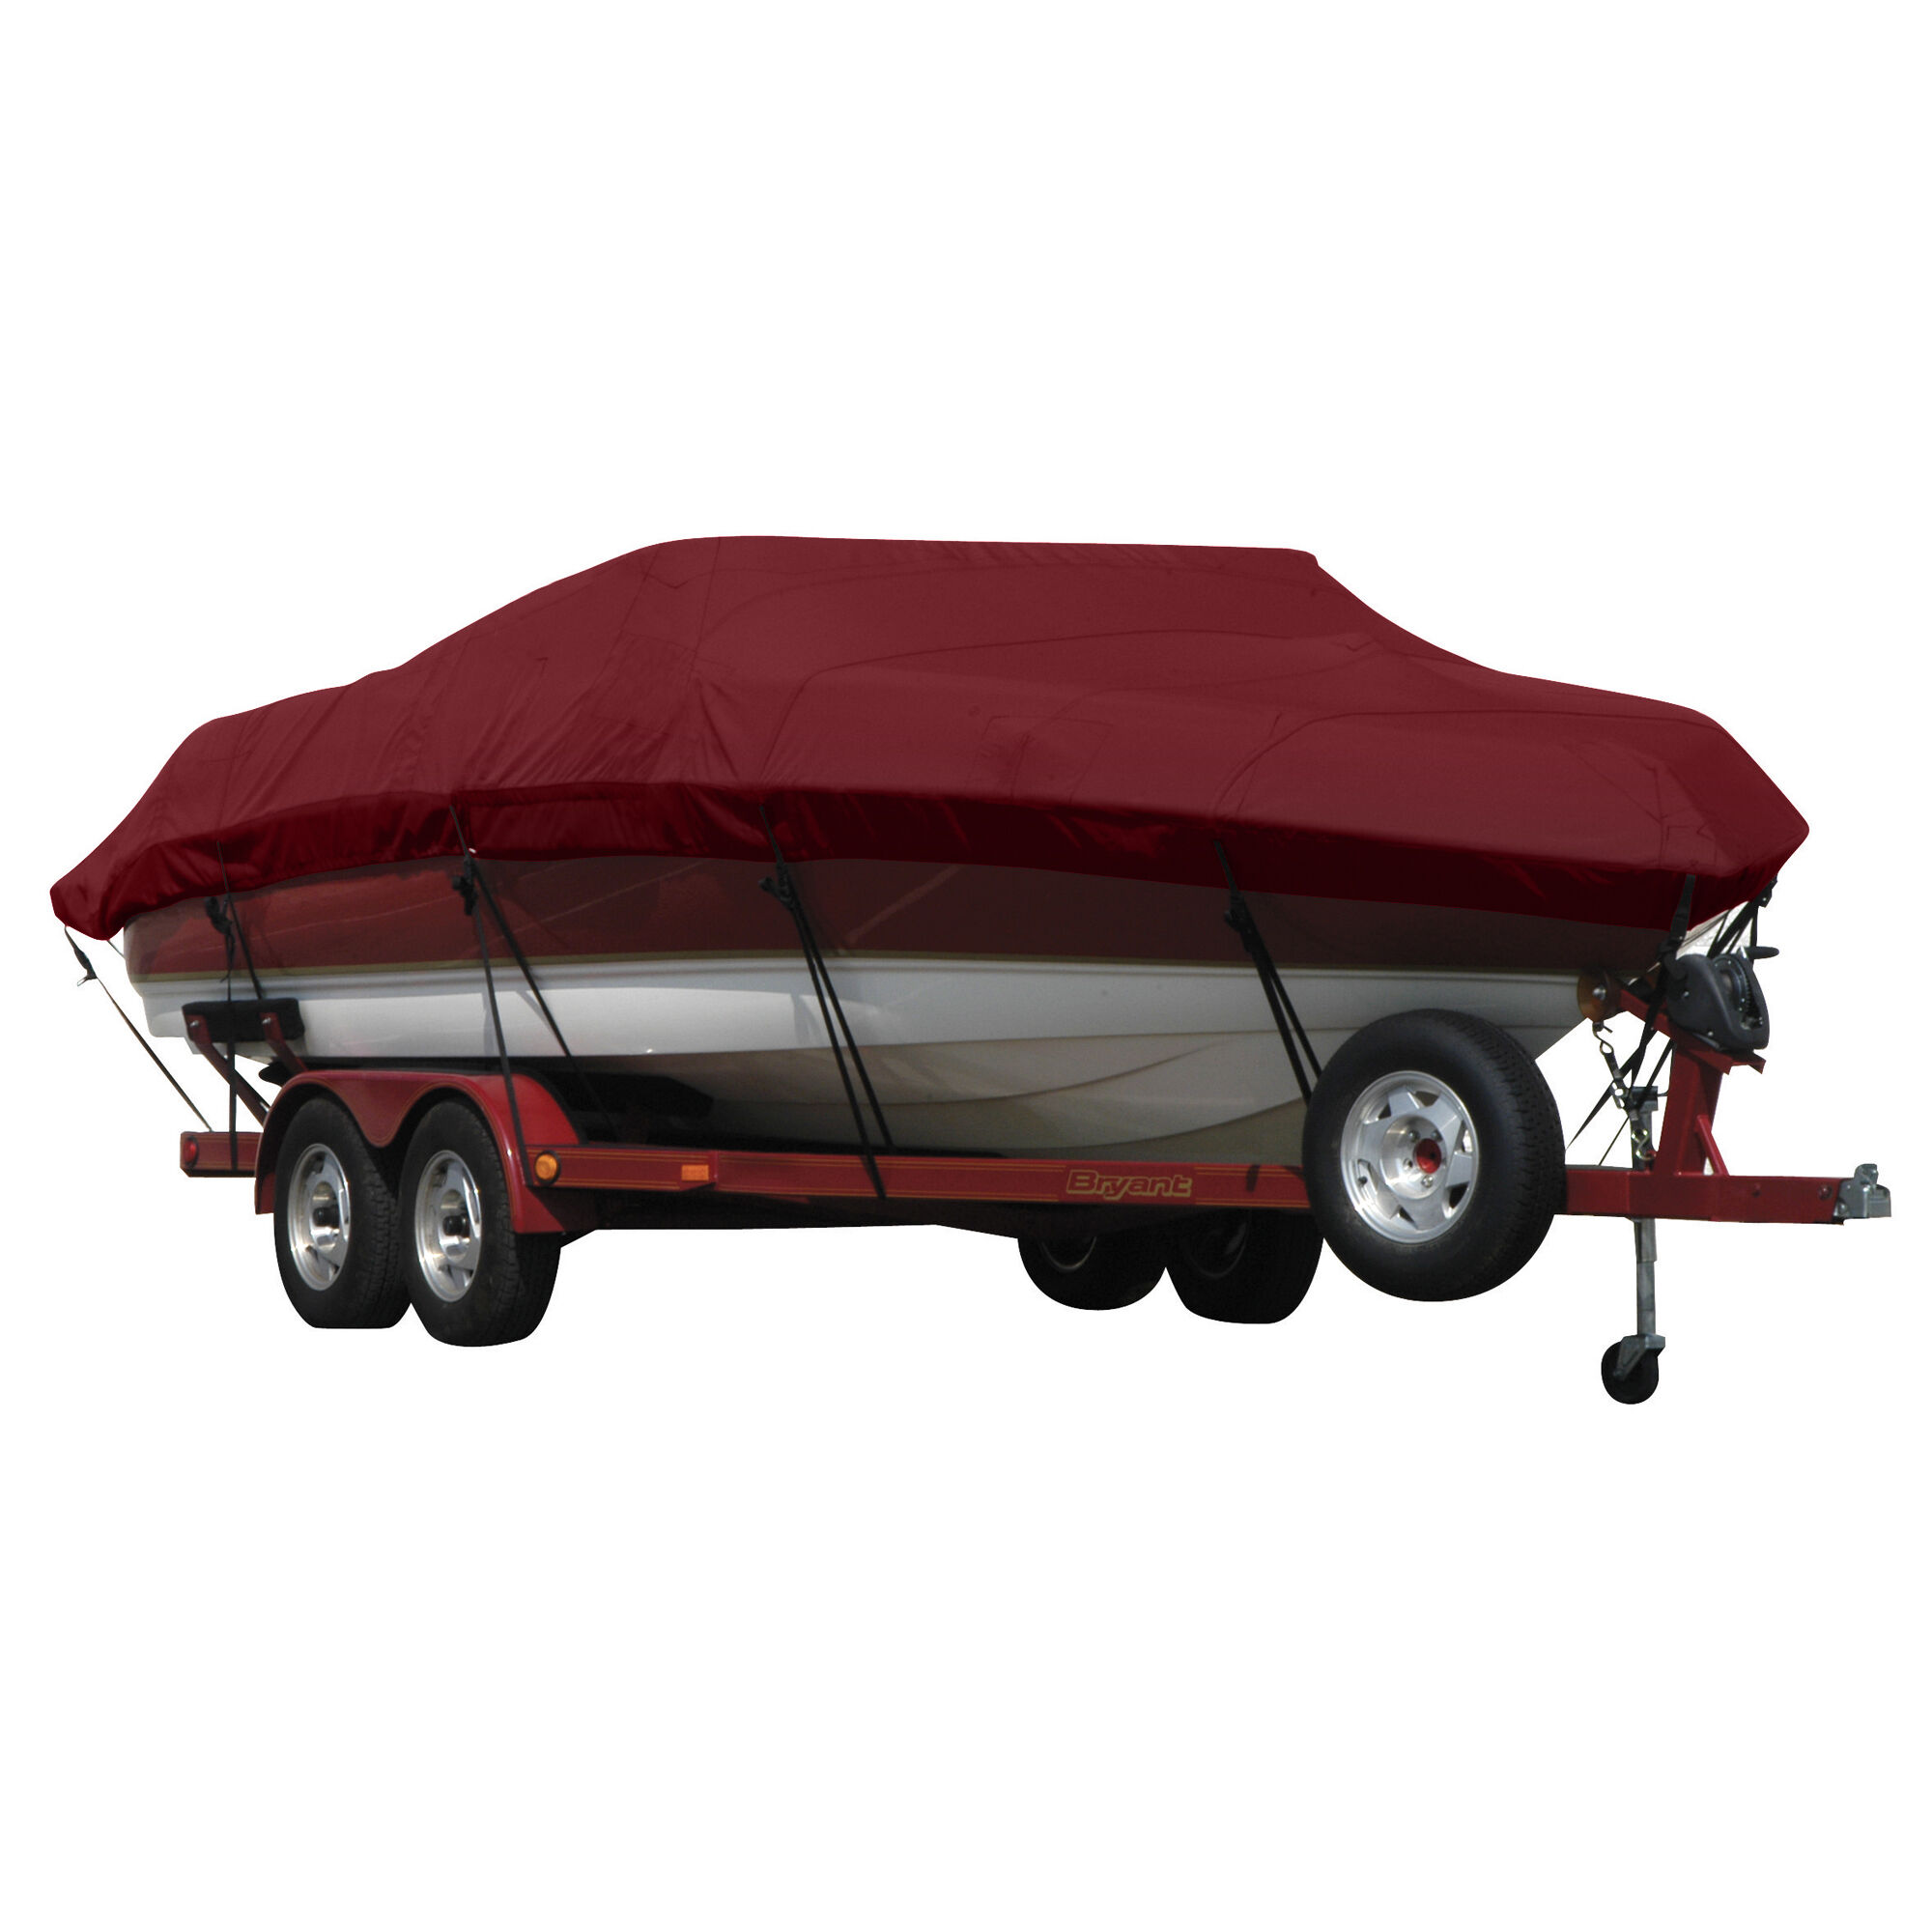 Covermate Exact Fit Sunbrella Boat Cover for Sea Ray 250 Cc 250 Cc No Pulpit I/O. Burgundy